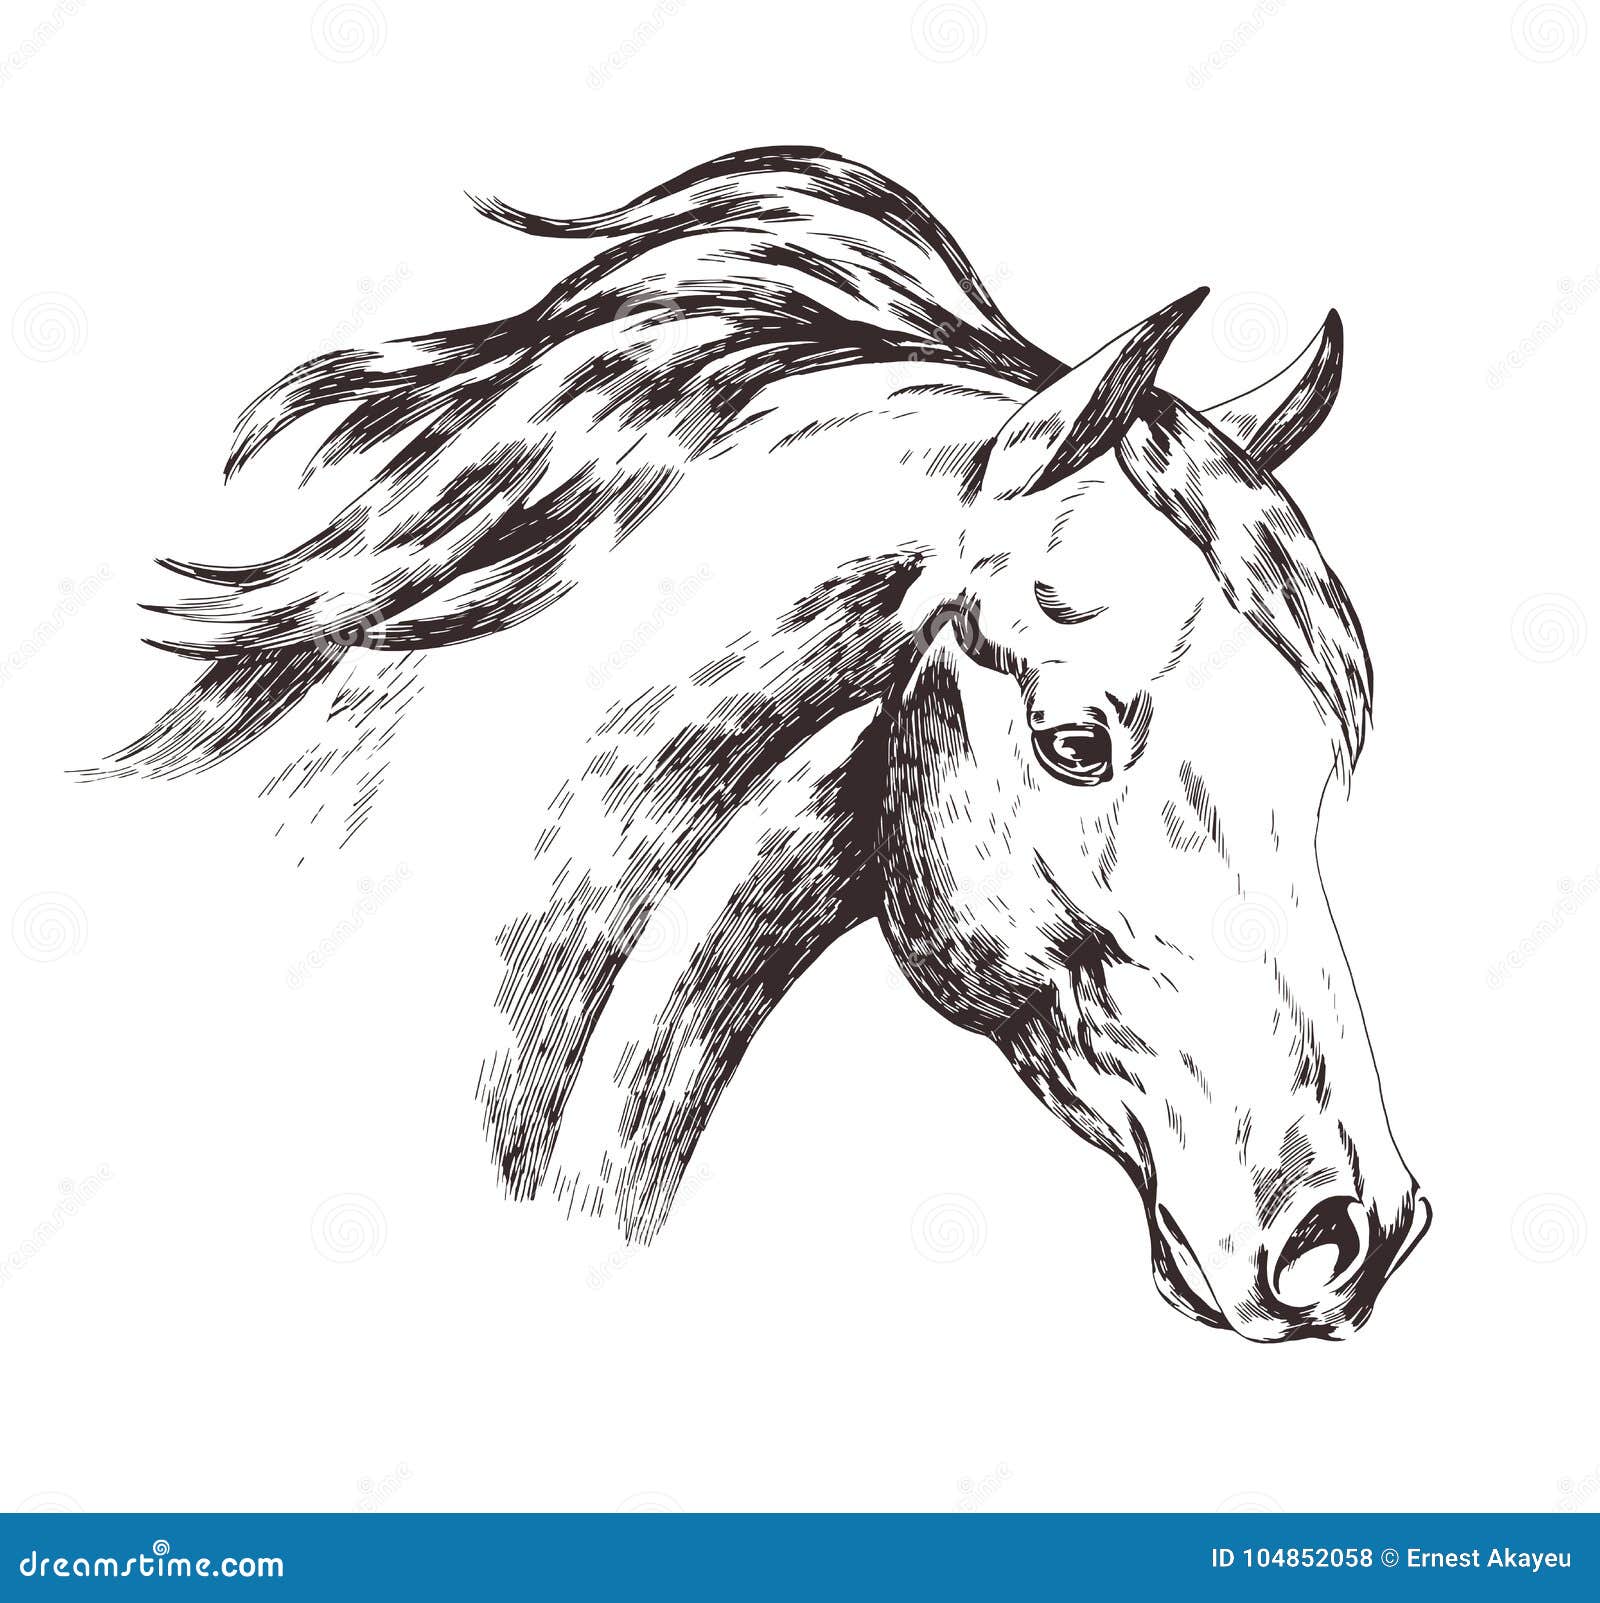 How to Draw a Horse Head Detail